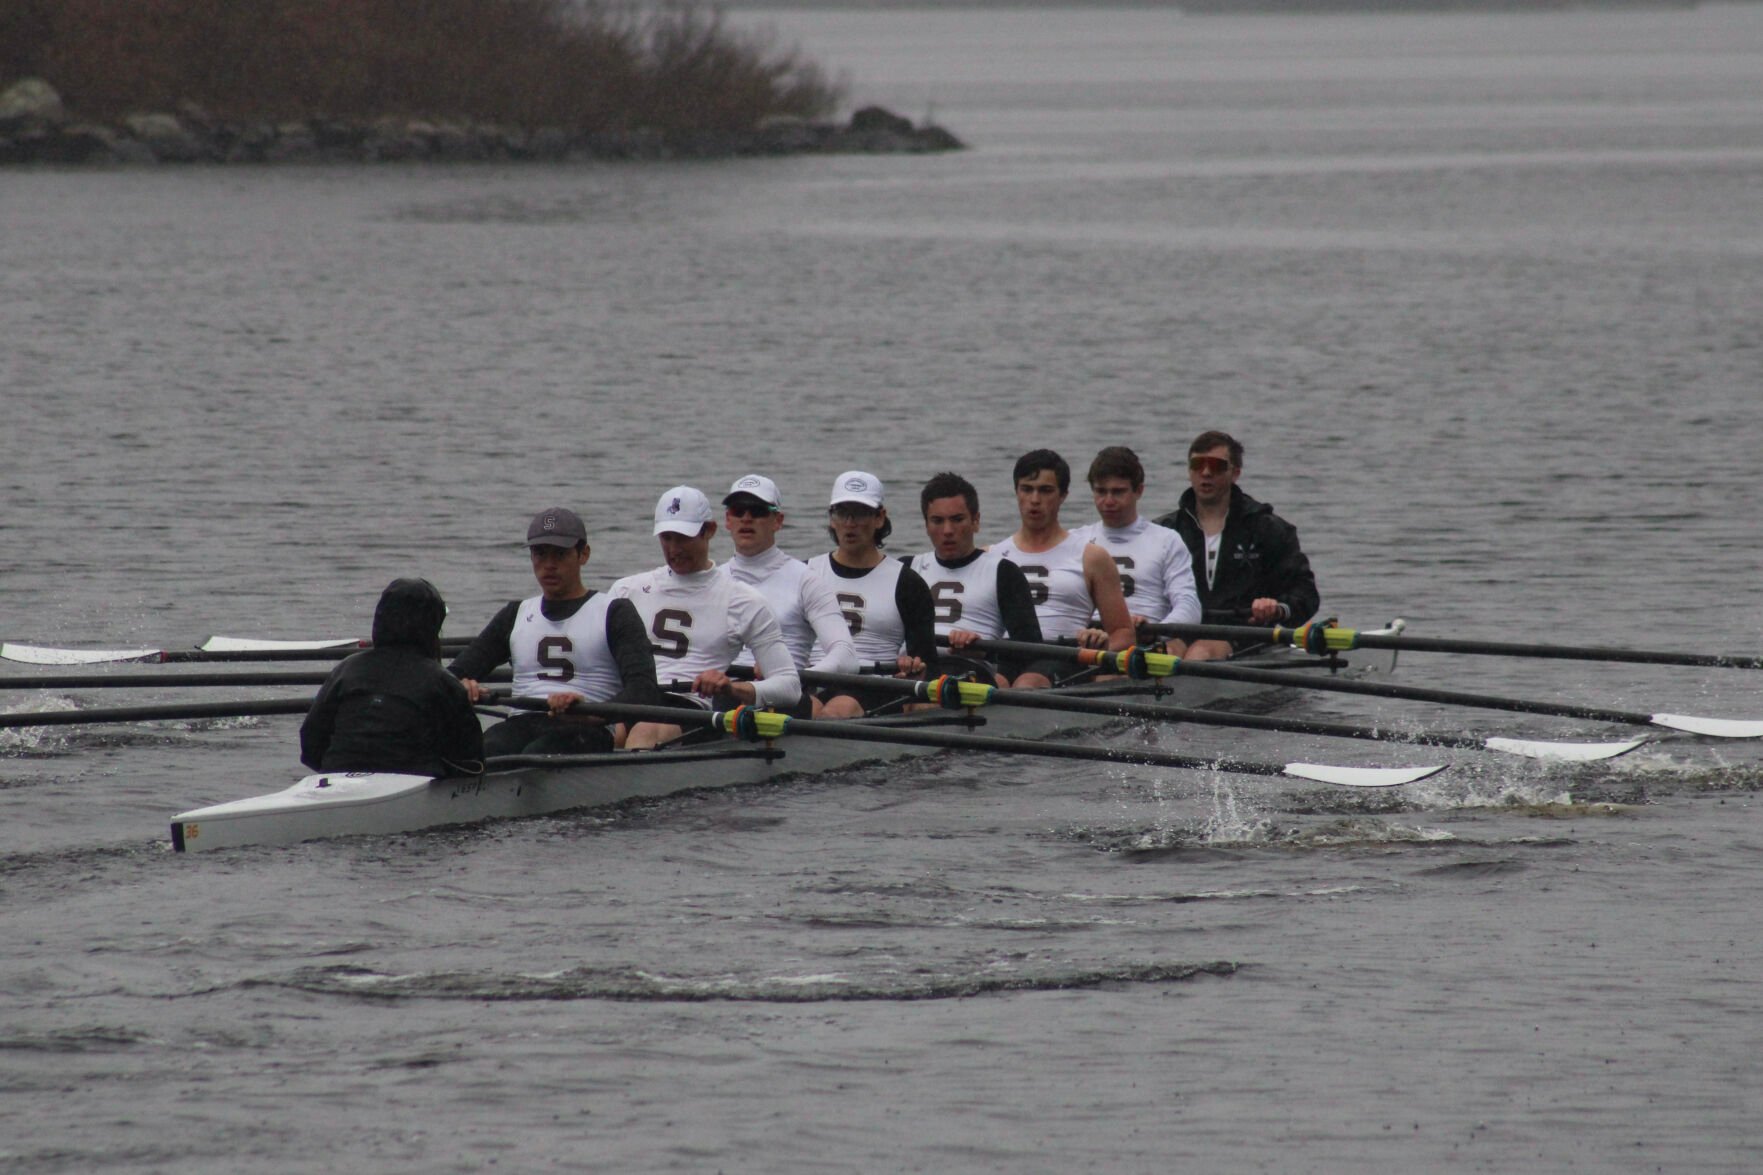 Crew: Stonington boys and girls first eights have good day on the Mystic River